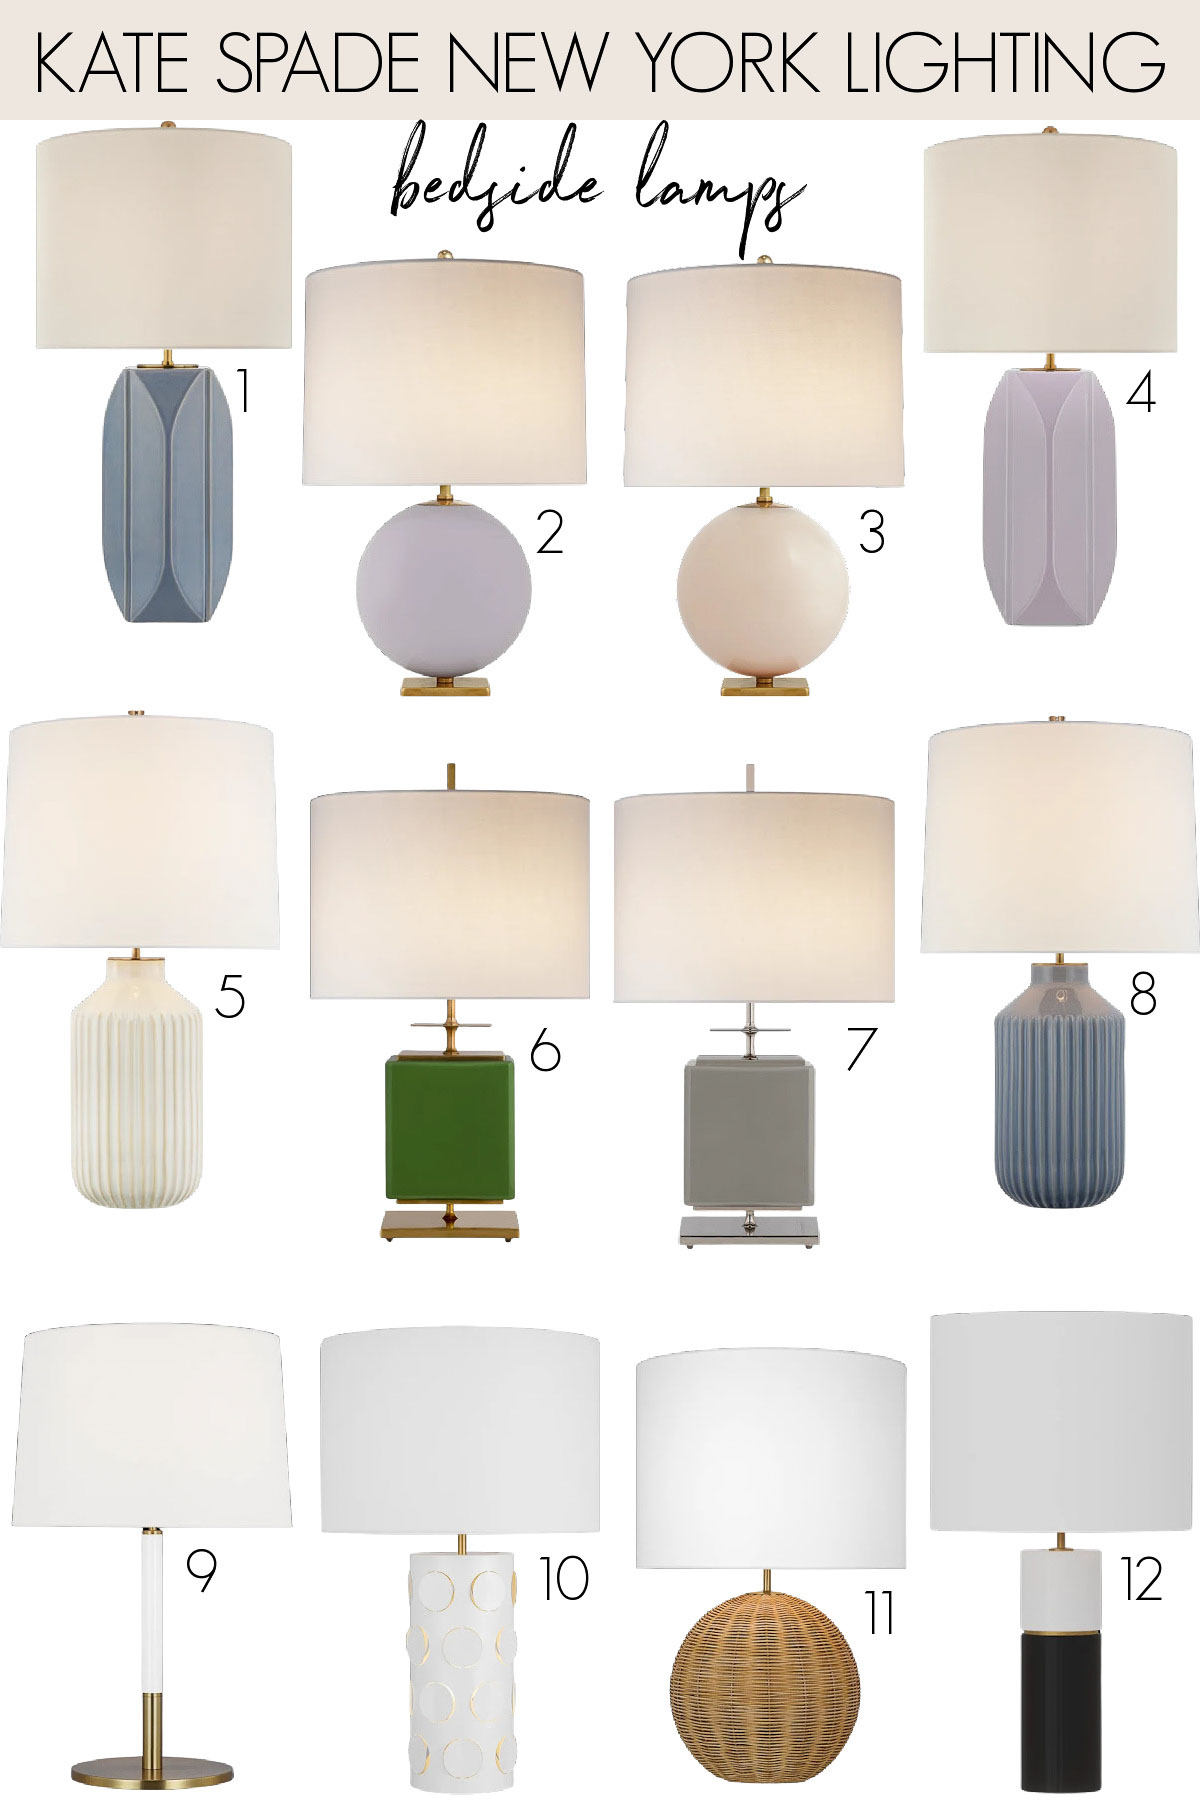 Bedroom lamps for your nightstand by Kate Spade